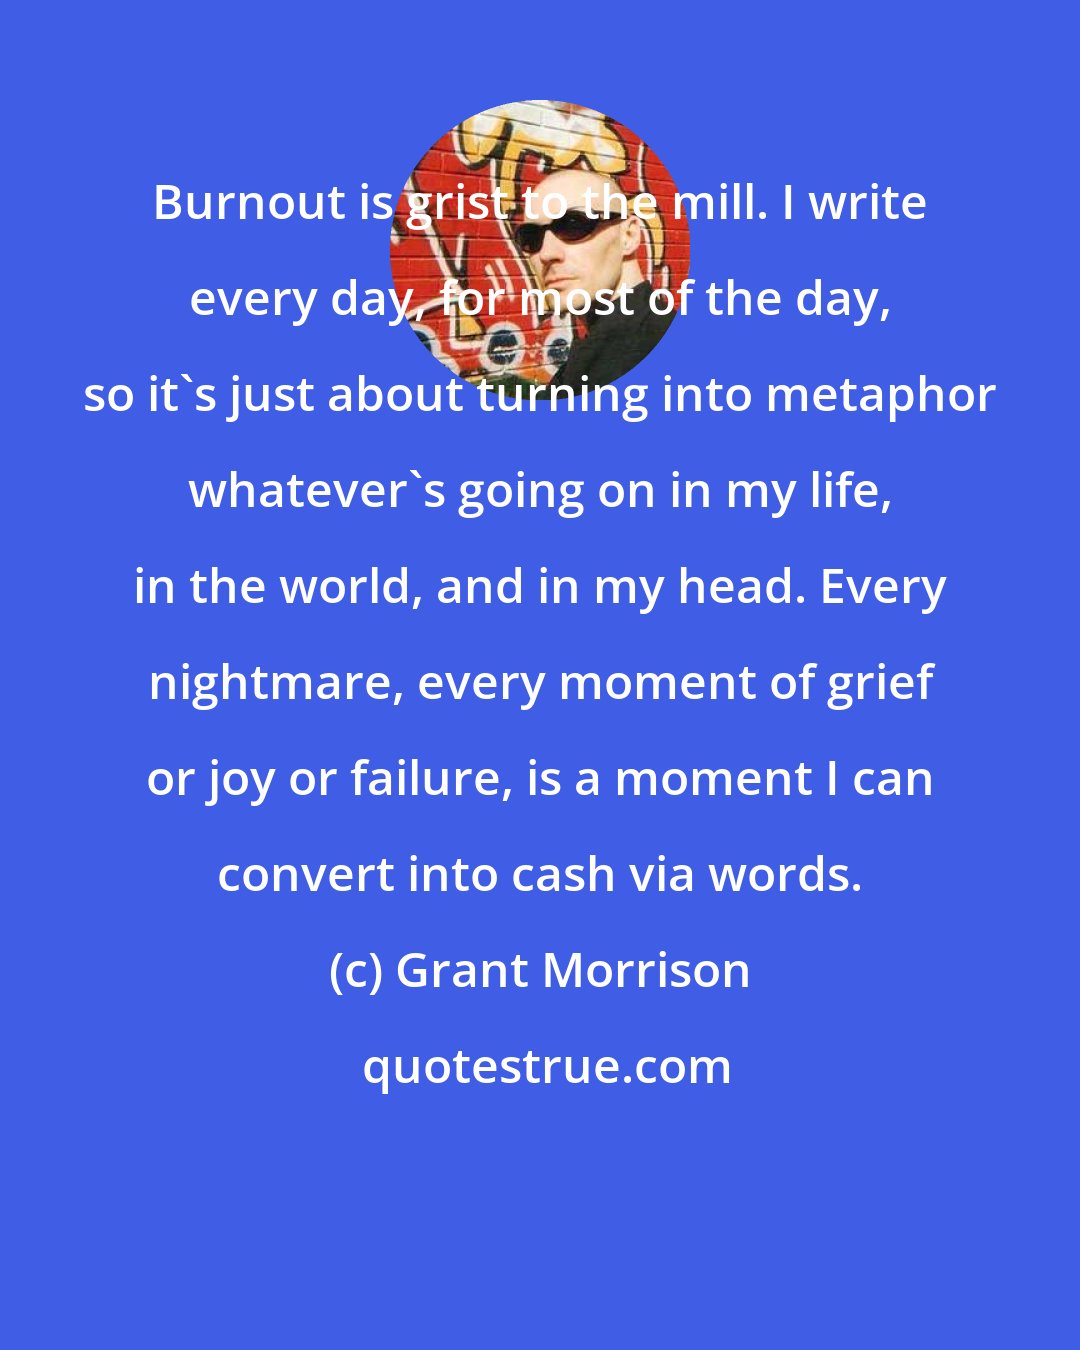 Grant Morrison: Burnout is grist to the mill. I write every day, for most of the day, so it's just about turning into metaphor whatever's going on in my life, in the world, and in my head. Every nightmare, every moment of grief or joy or failure, is a moment I can convert into cash via words.